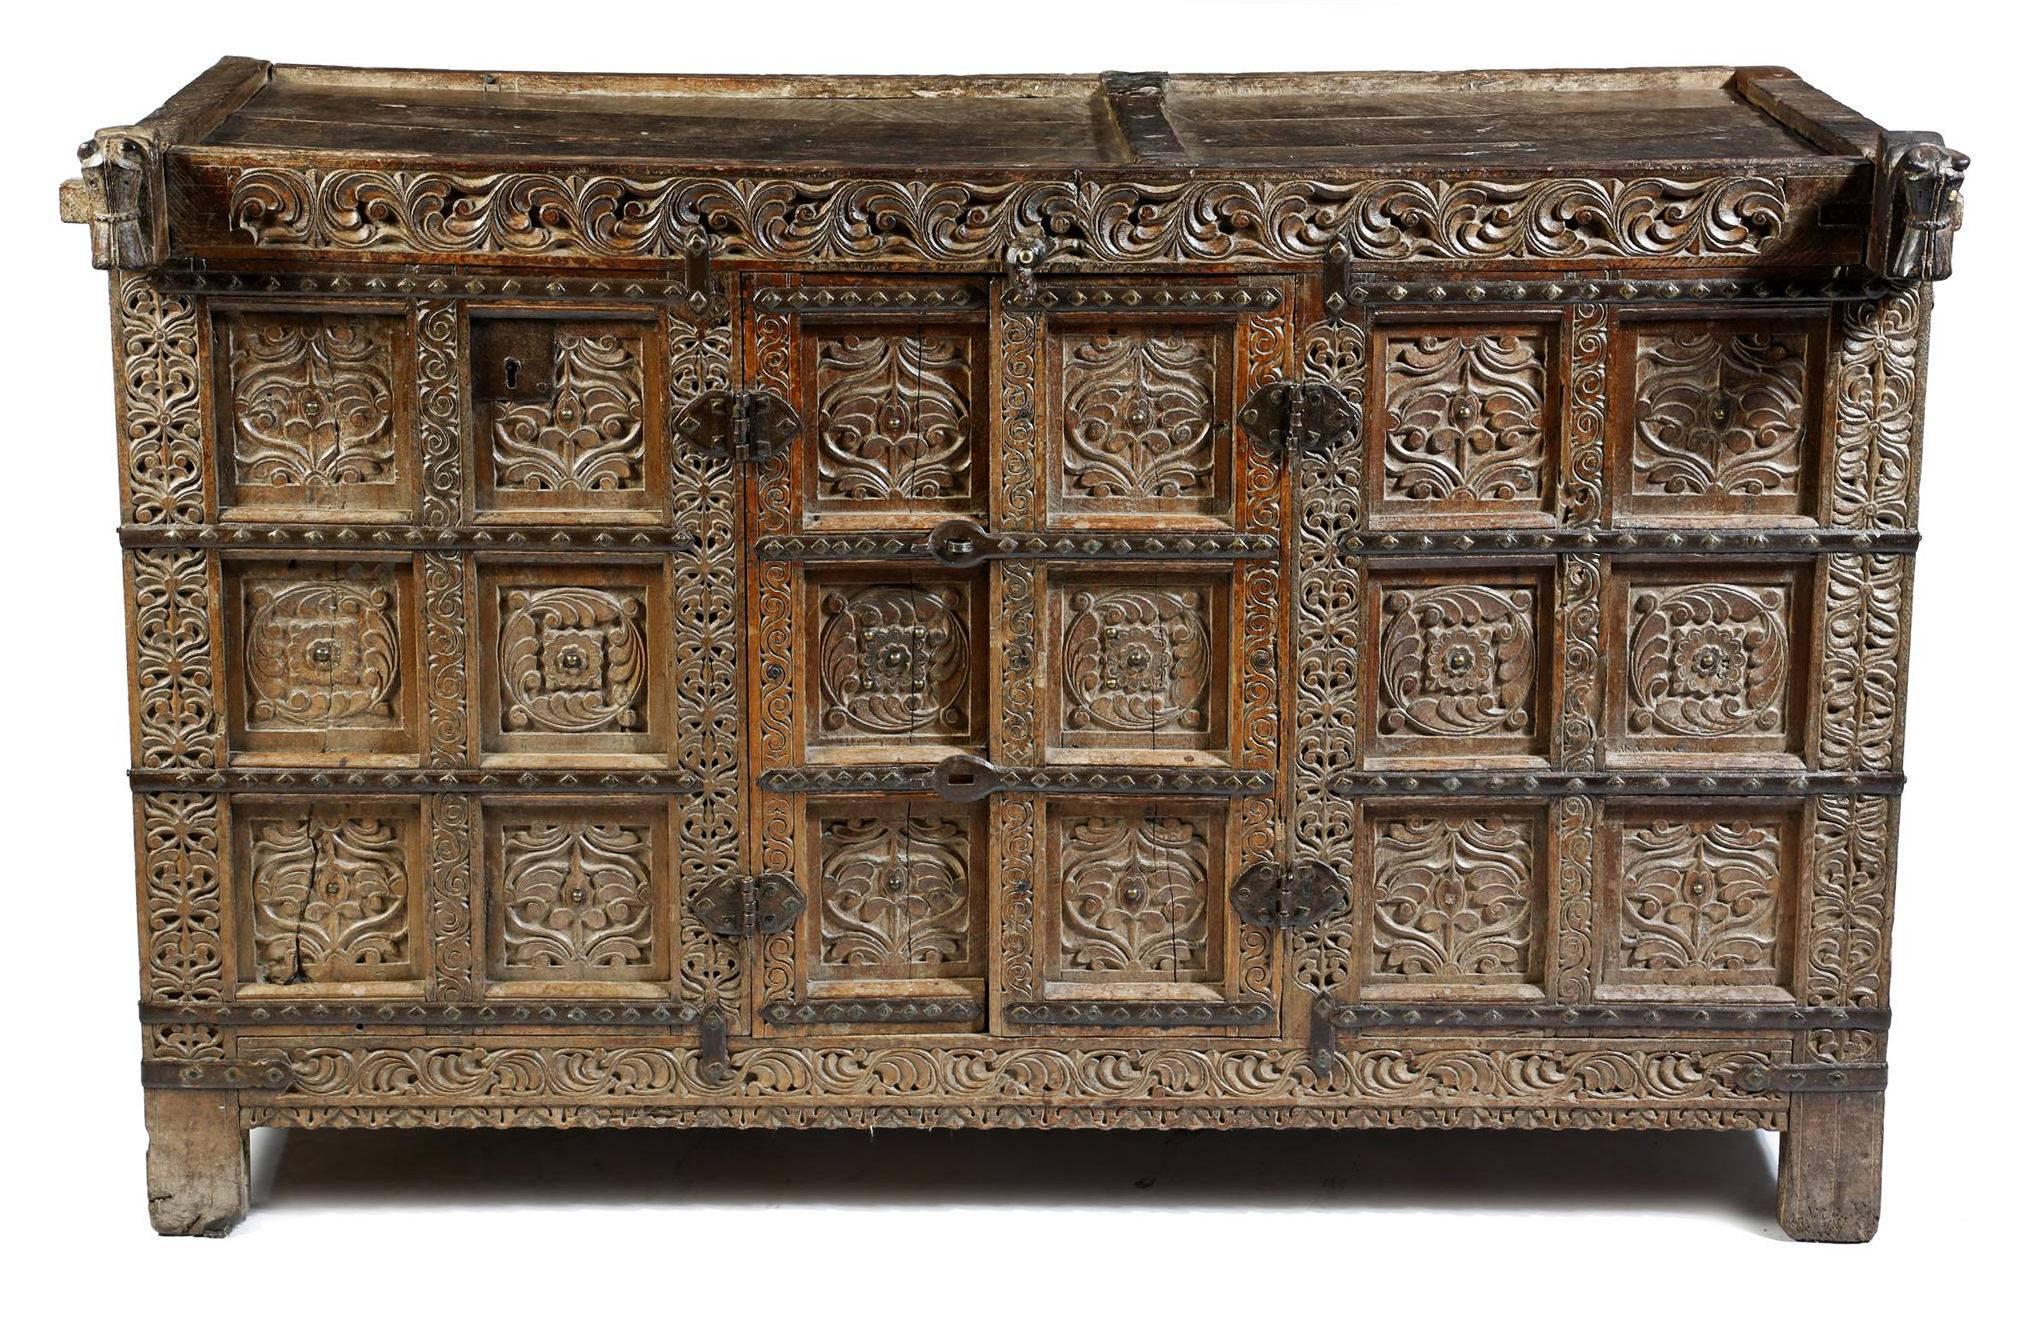 Anglo-Indian Damchiya Dowry chest
An Indian hardwood bride's dowry chest or Damchiya. The intricately carved and decorated cabinet is with iron strapping and brass diamond washers, the front corners carved with Primitive horse head finials. The